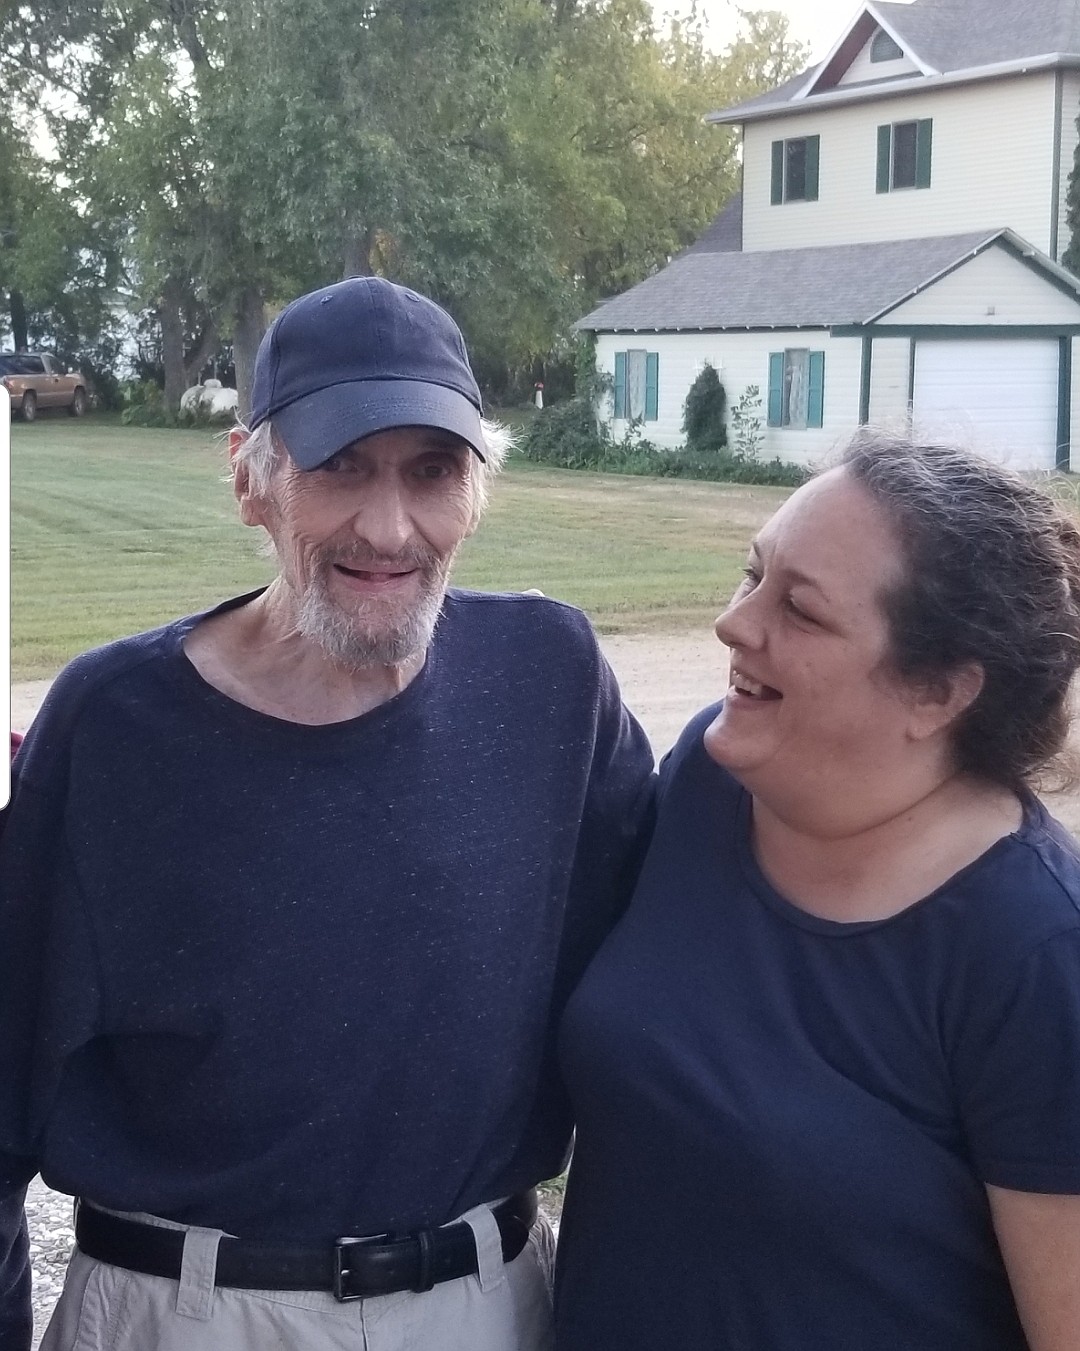 Serenity Frantzen is pictured with her father, Robert Marr, in September of 2020. Marr had recently been removed from the Whitefish Care and Rehabilitation Center following the facility's COVID-19 outbreak. (Photo provided by Serenity)